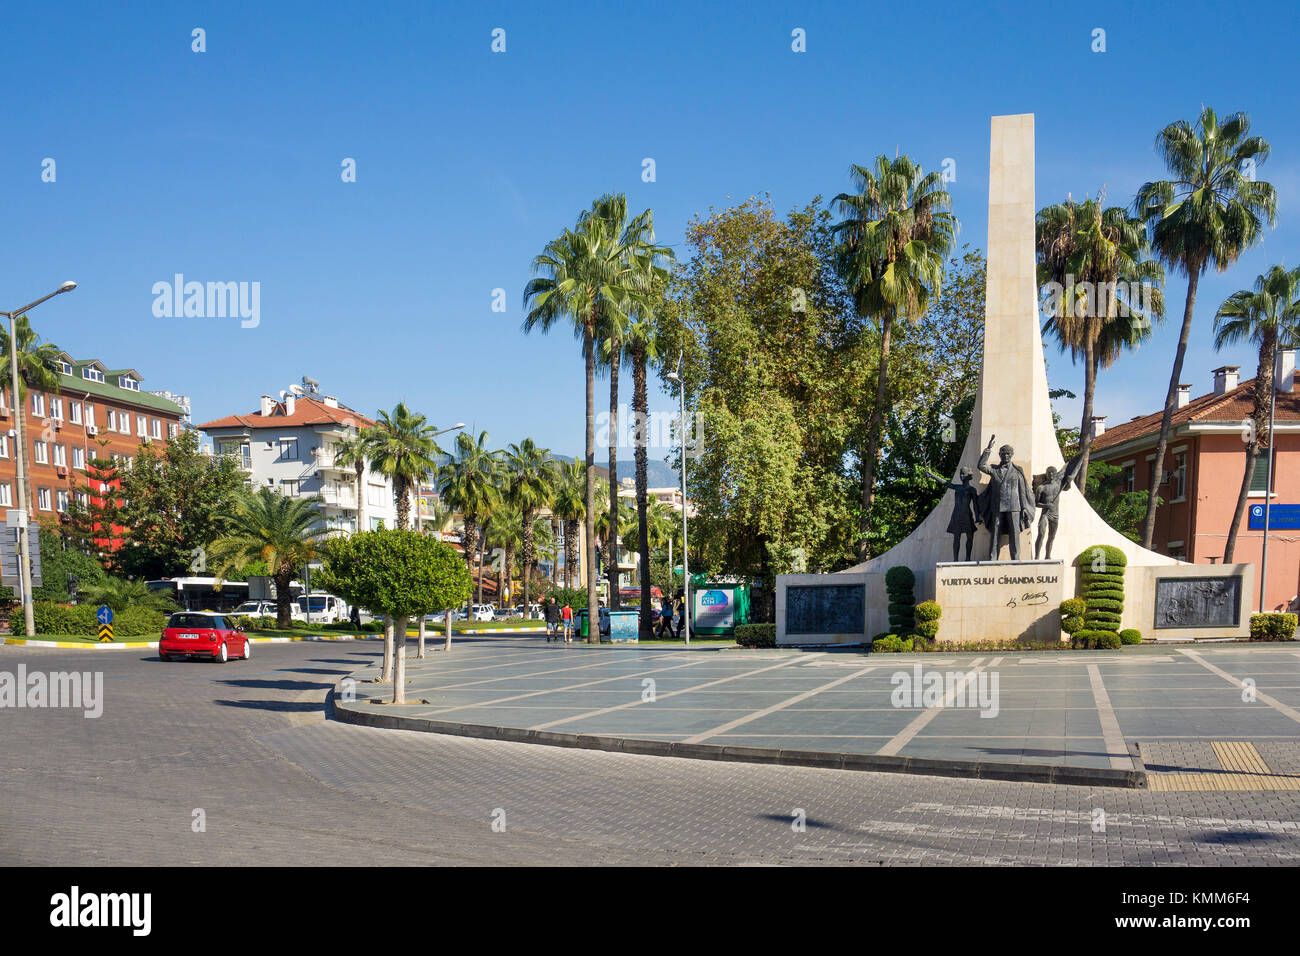 Ataturk Monument with letters Yurtta sulh, cihanda sulh (in english: Peace at home, peace in the world), Alanya, turkish riviera, Turkey Stock Photo